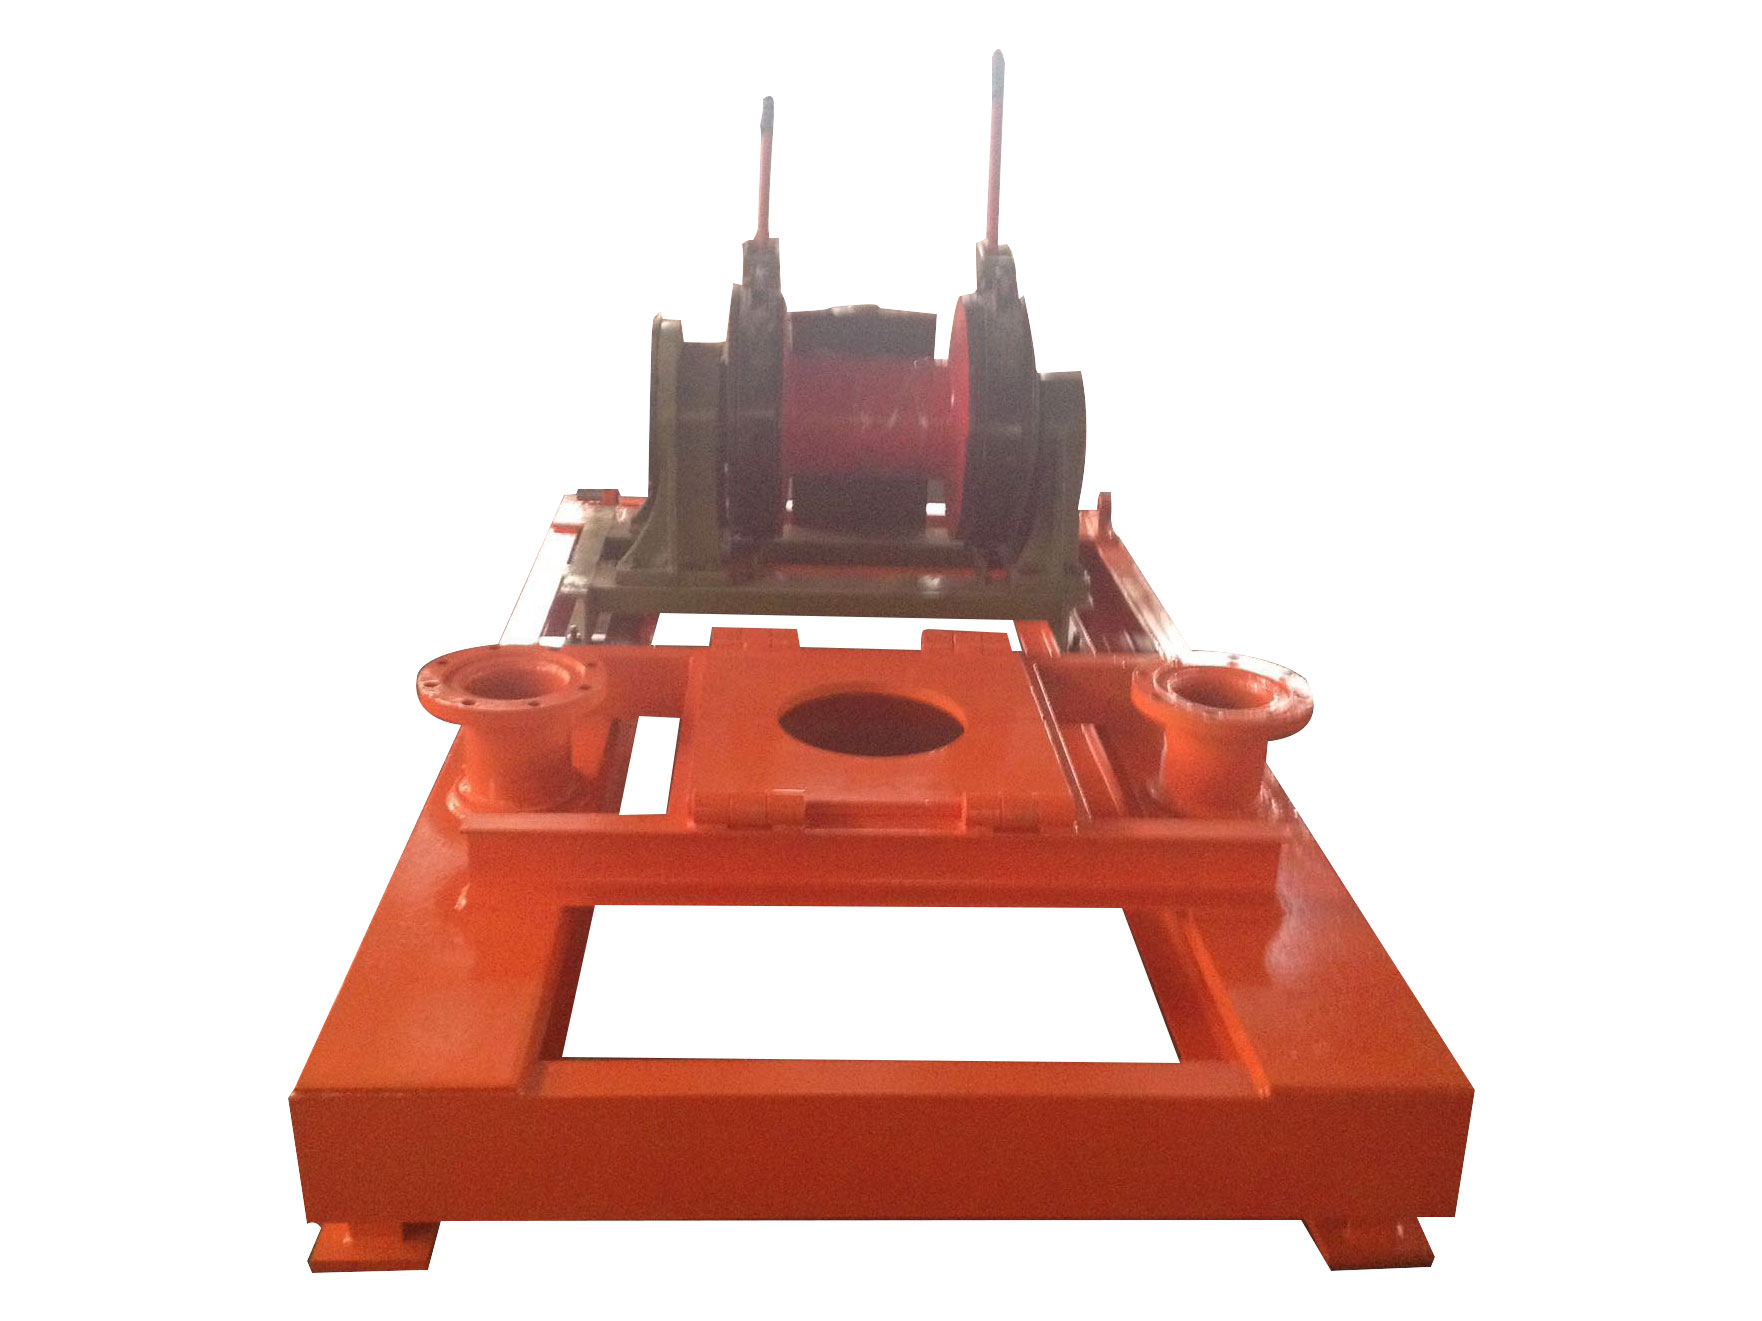 600-1200 type grouting frame